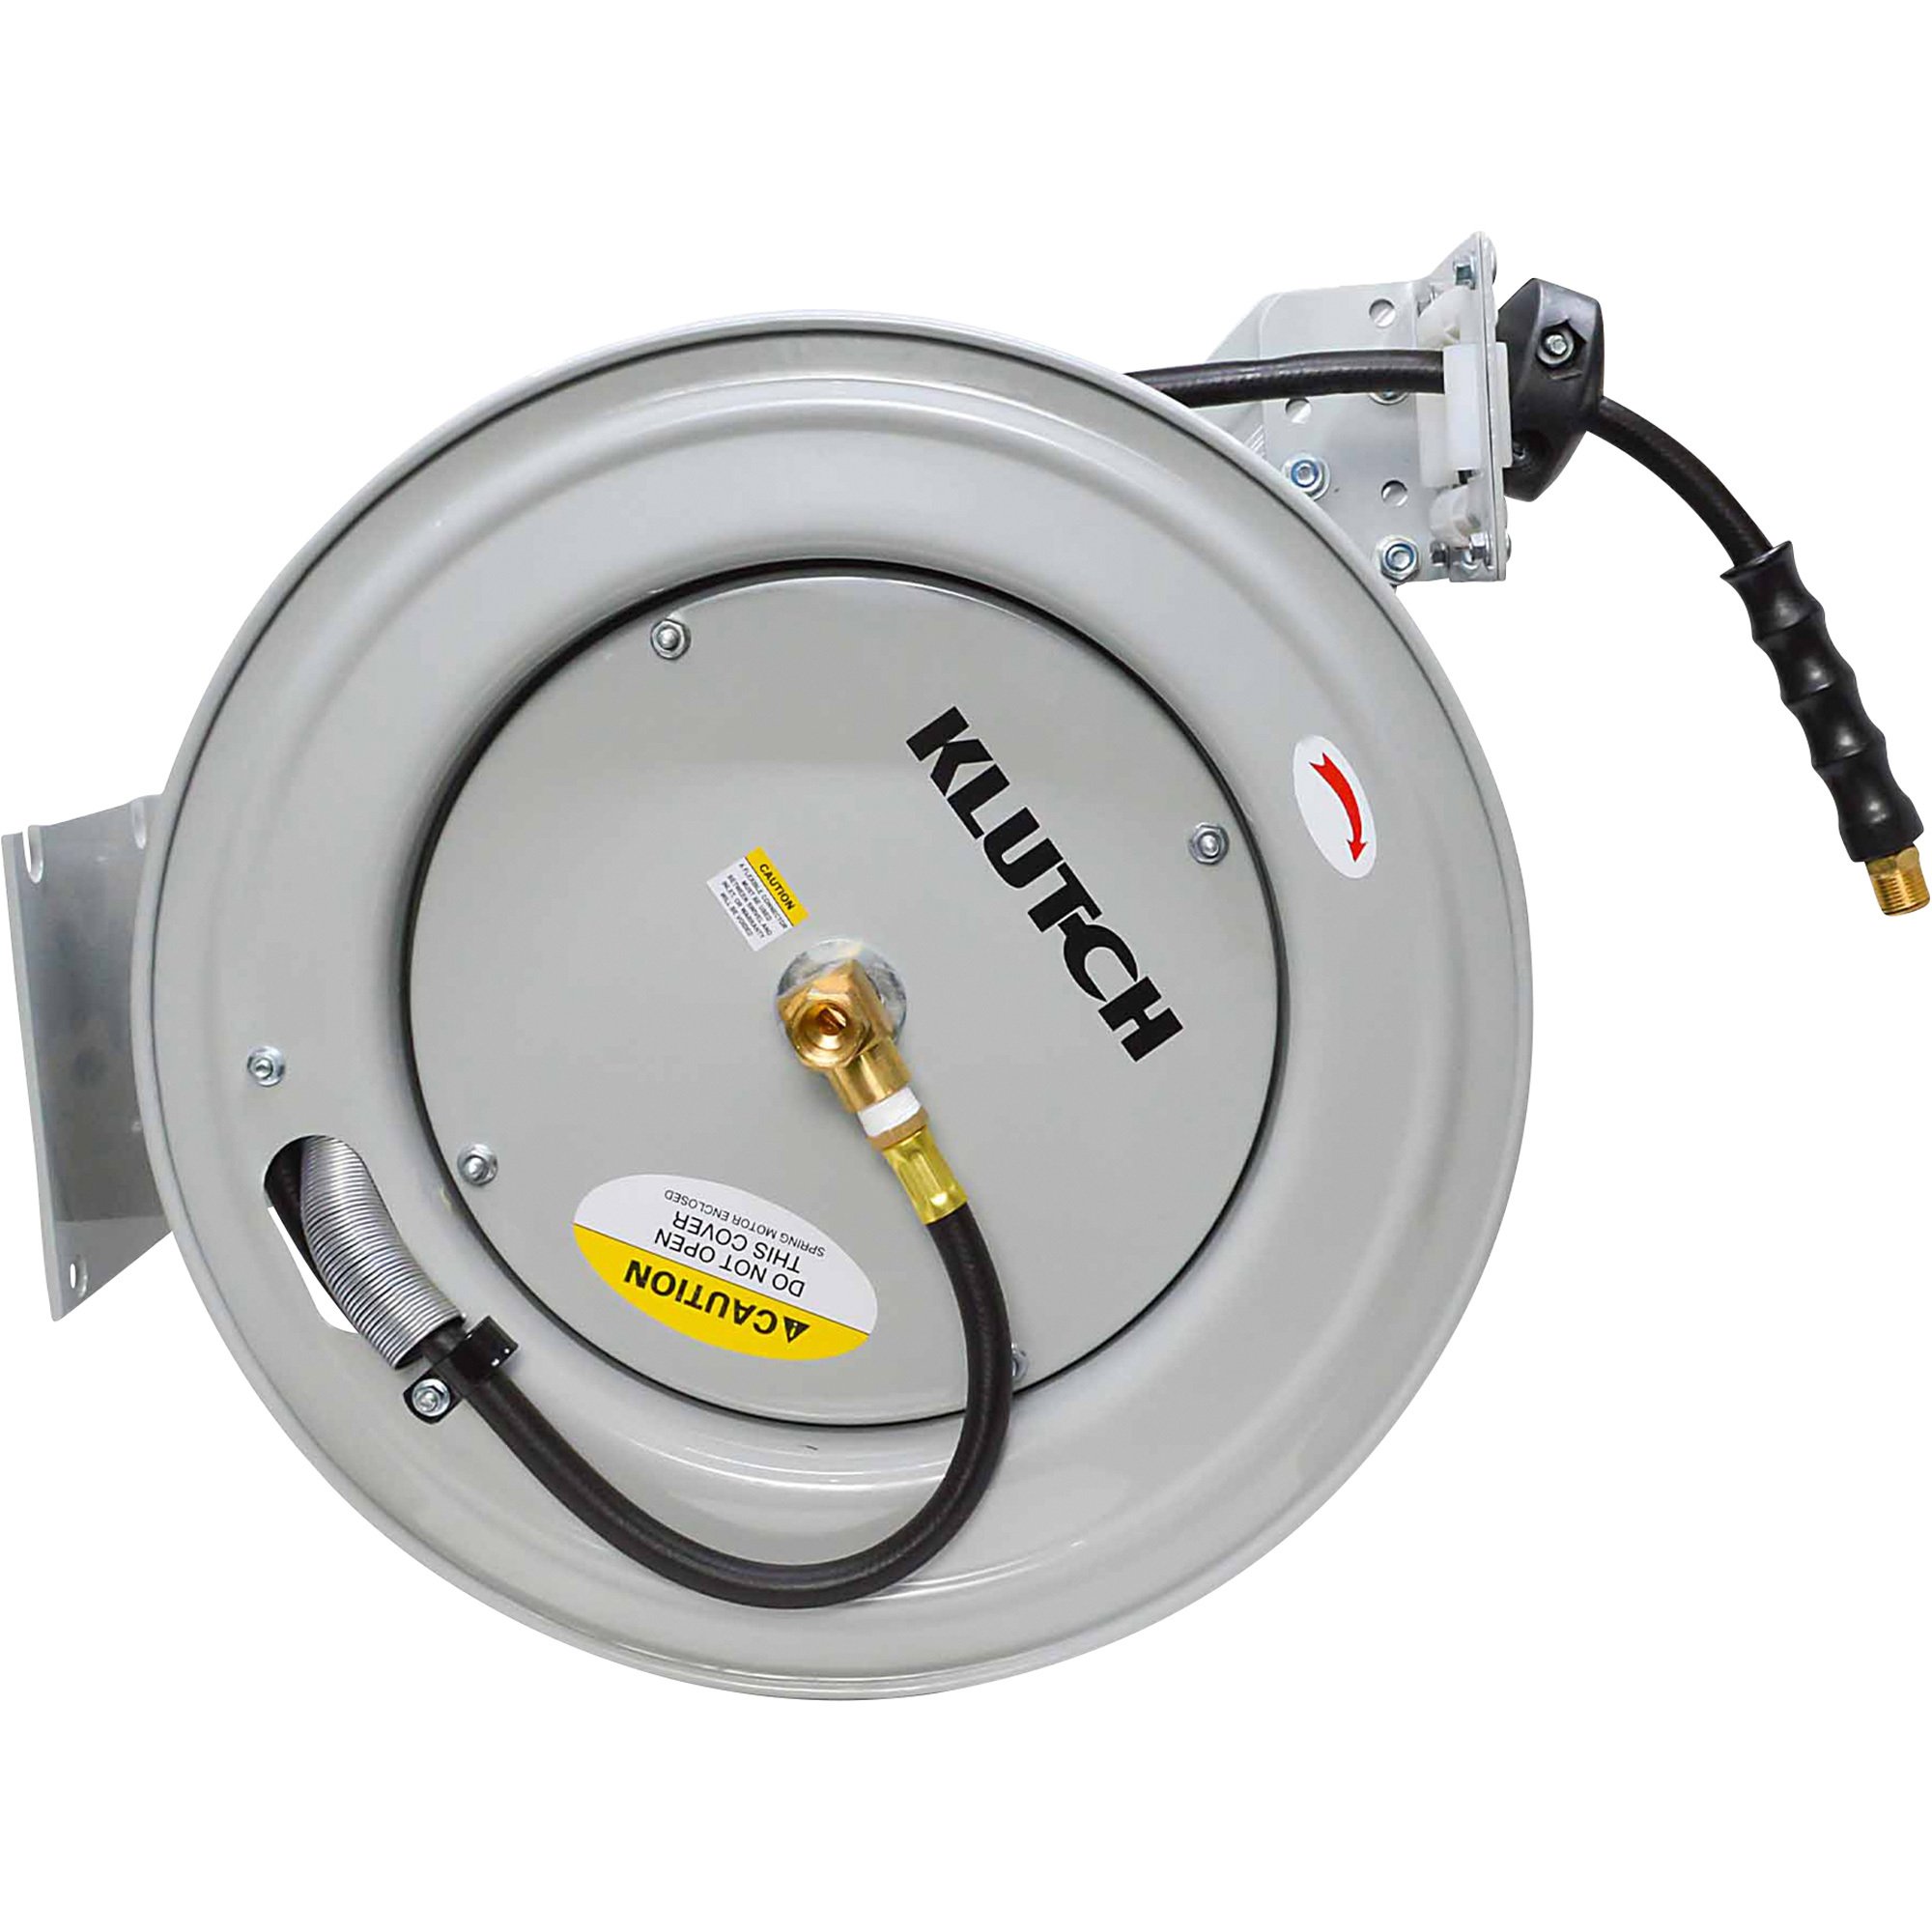 Klutch Auto-Rewind Air Hose Reel, with 3/8in. x 75ft. Rubber Hose, 300 PSI,  Model# TLEXR3875-NT